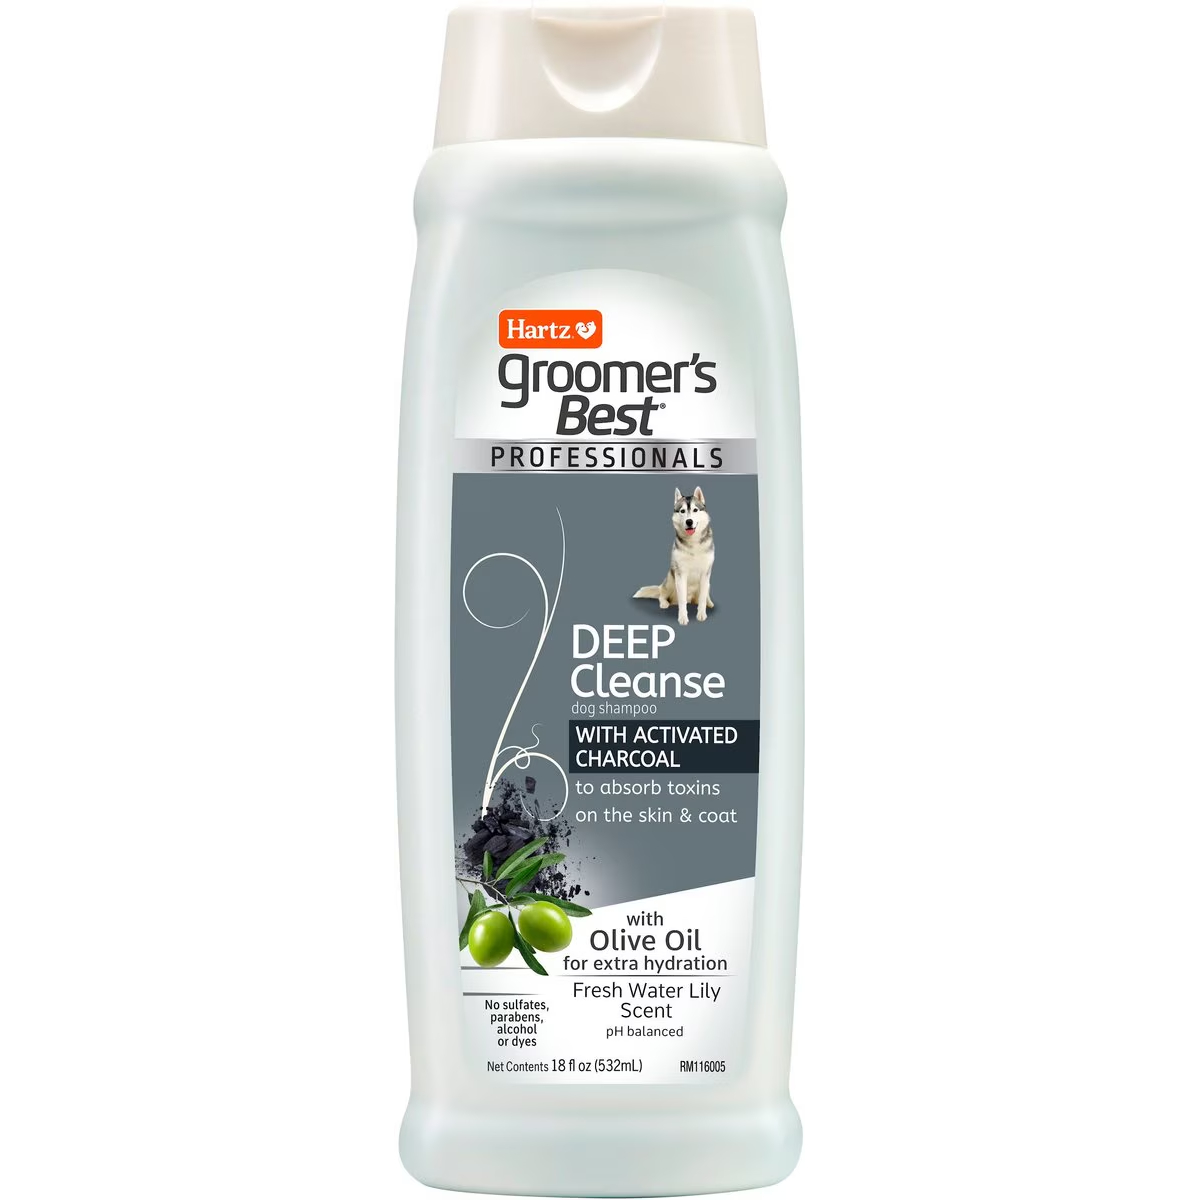 Hartz Groomer's Best Professionals Deep Cleanse with Olive Oil & Fresh Water Lily Scent Dog Shampoo